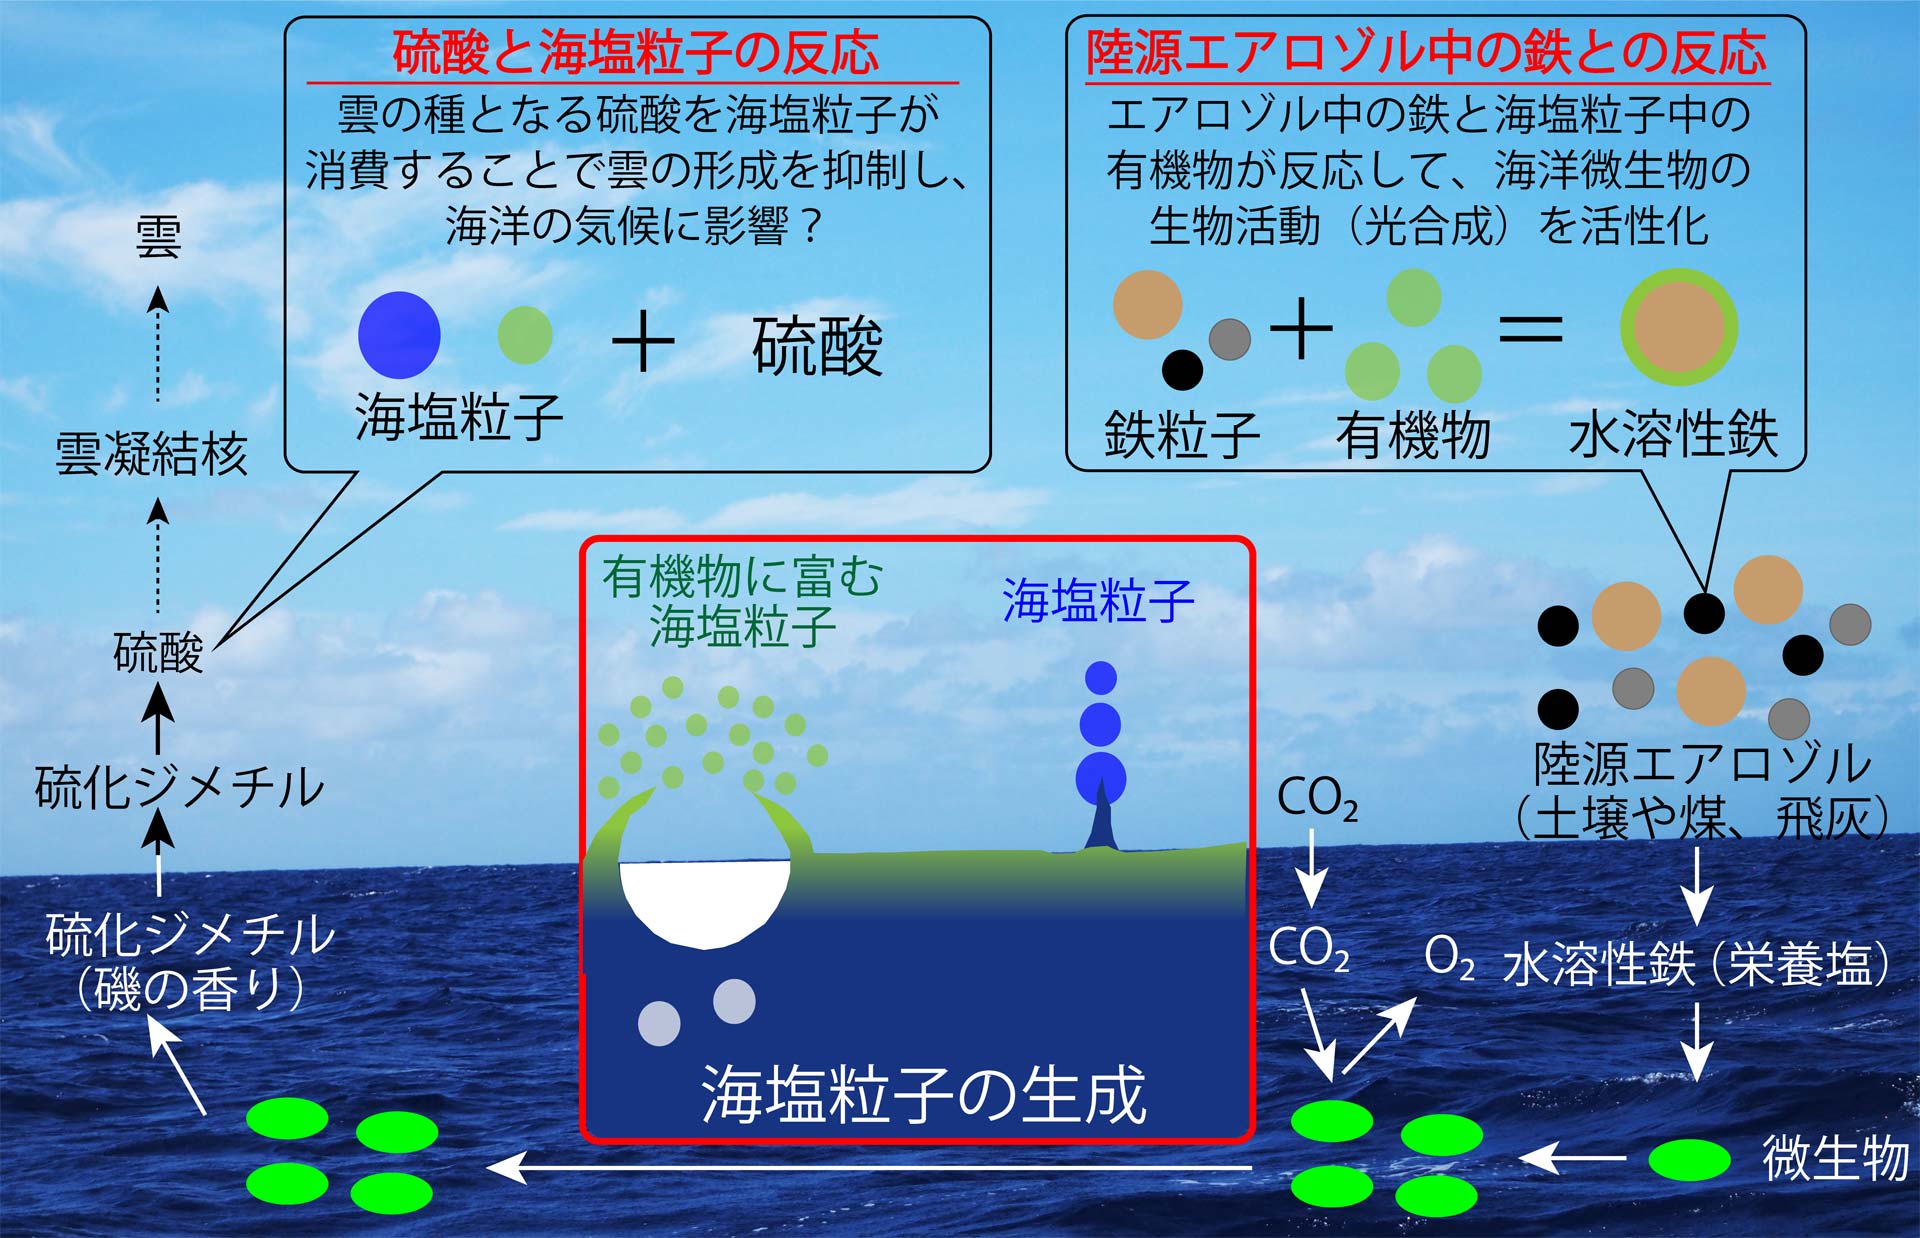 Impact of organic matter in sea salt particles on climate through atmospheric chemistry